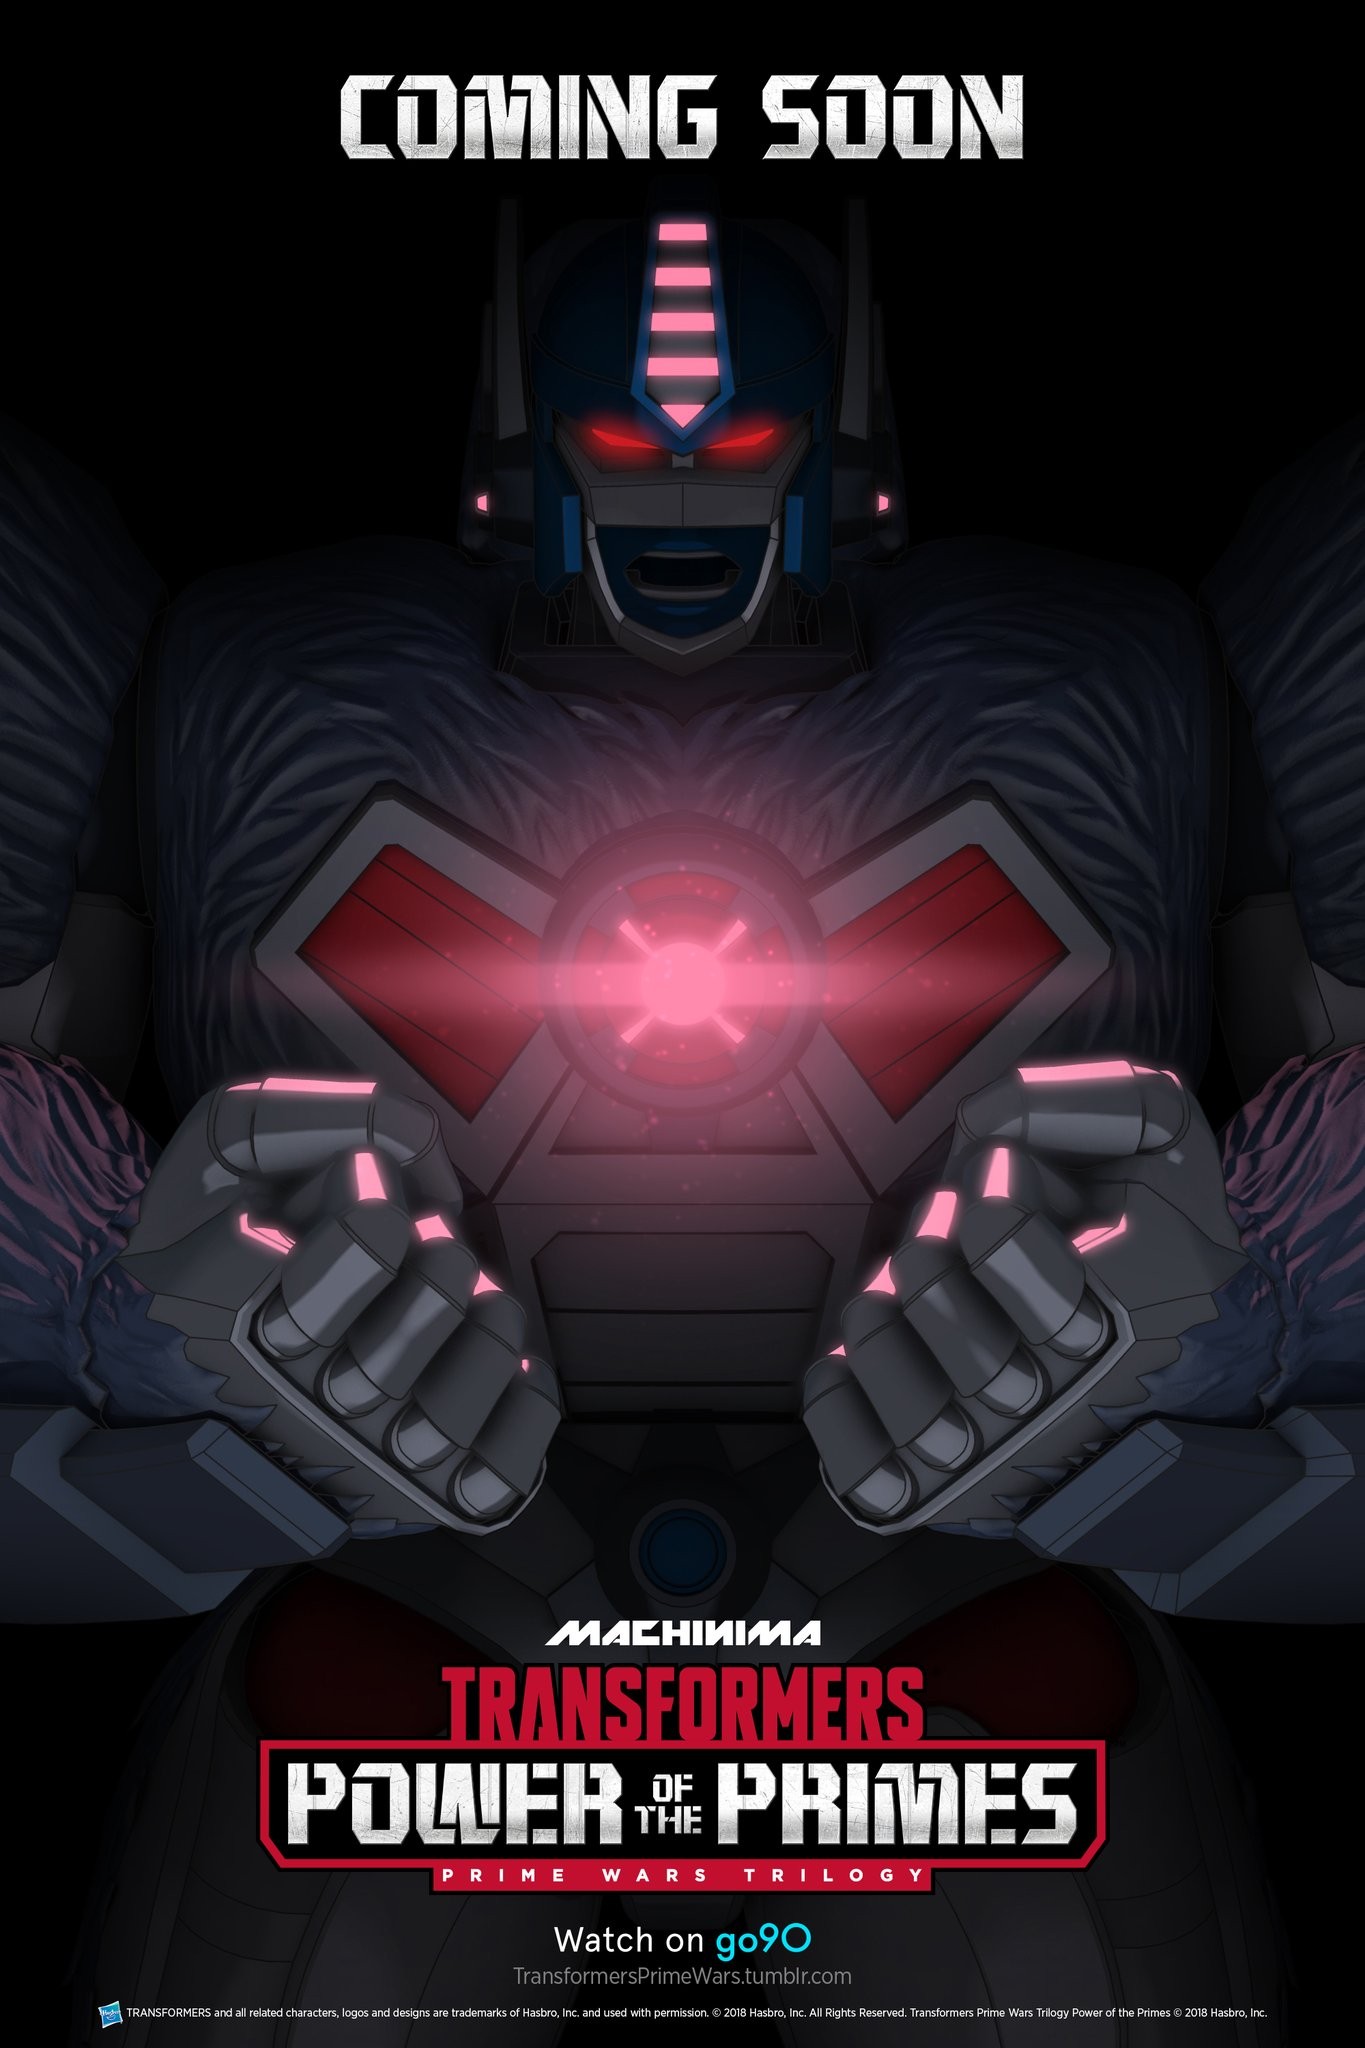 Transformers News: New Poster for Machinima Transformers Power of the Primes Animated Series